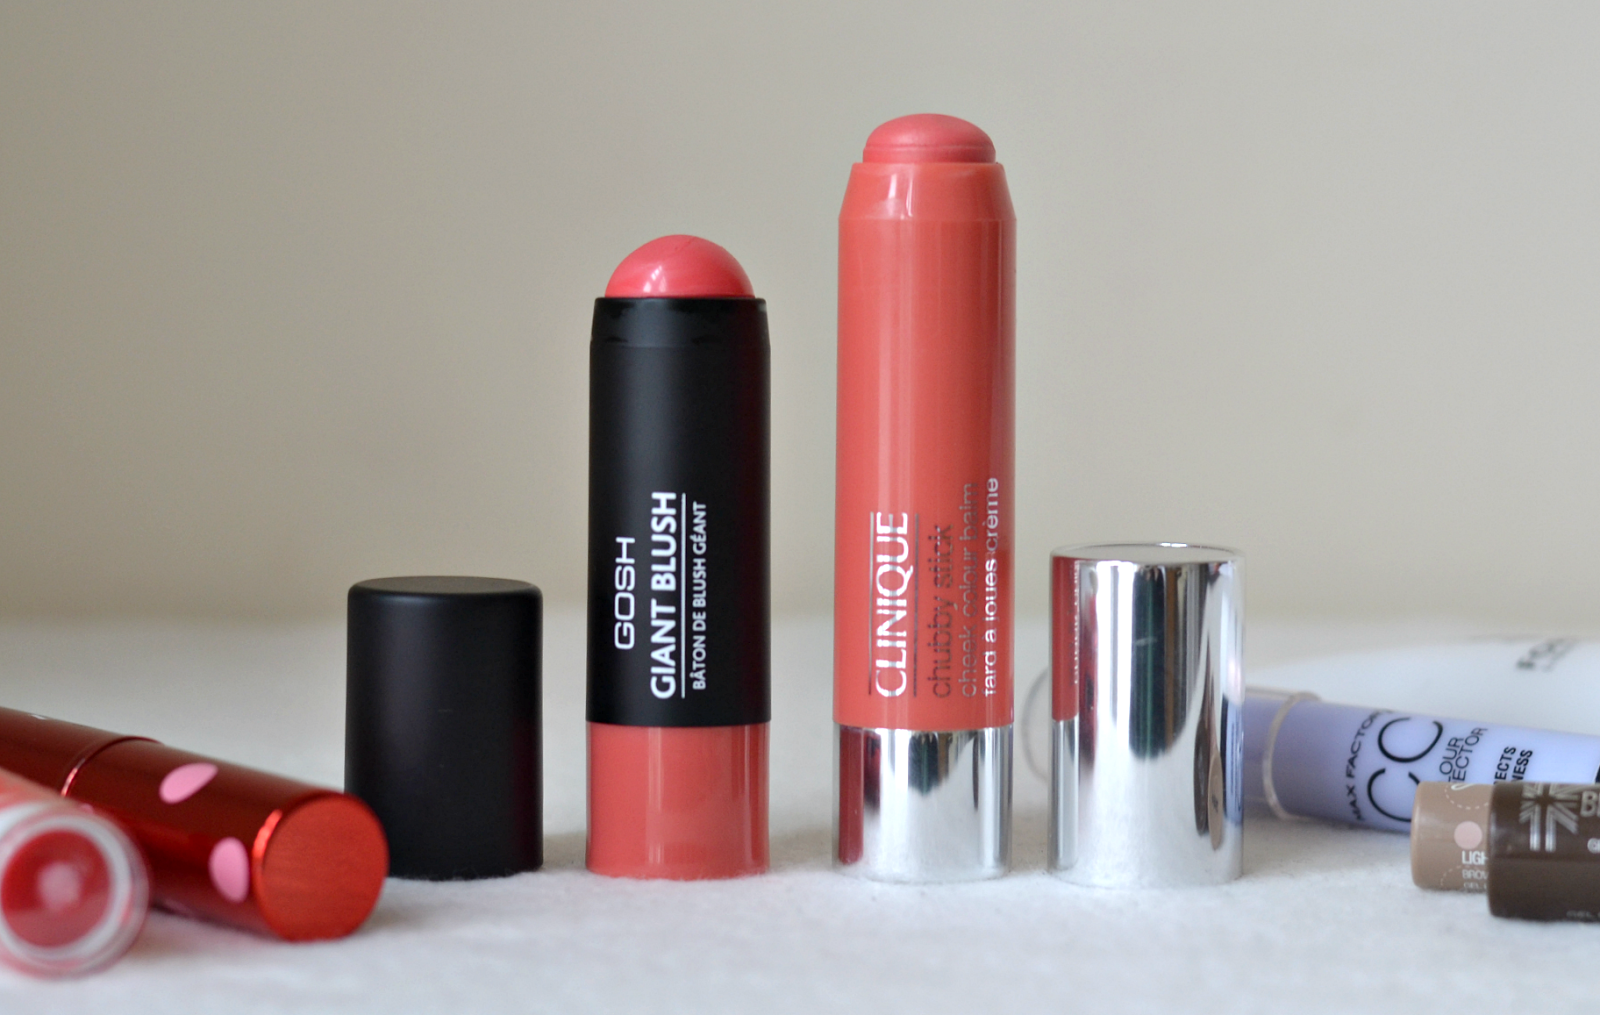 Four Great Makeup Dupes: Budget Alternatives To Some Of My 